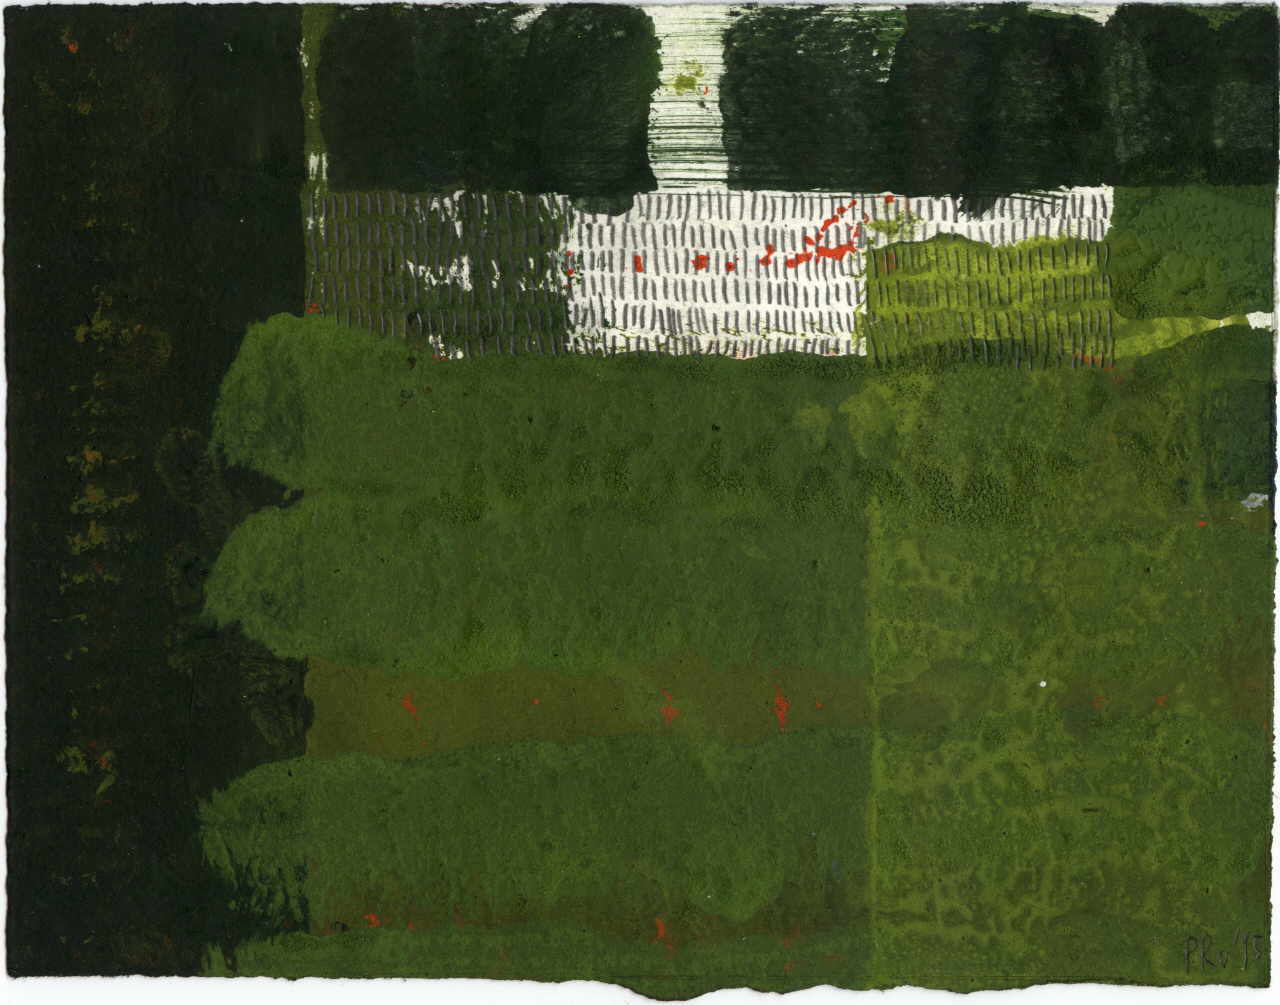 Prokop Claus 
untitled, 1995
mixed media / paper
16 x 22 cm